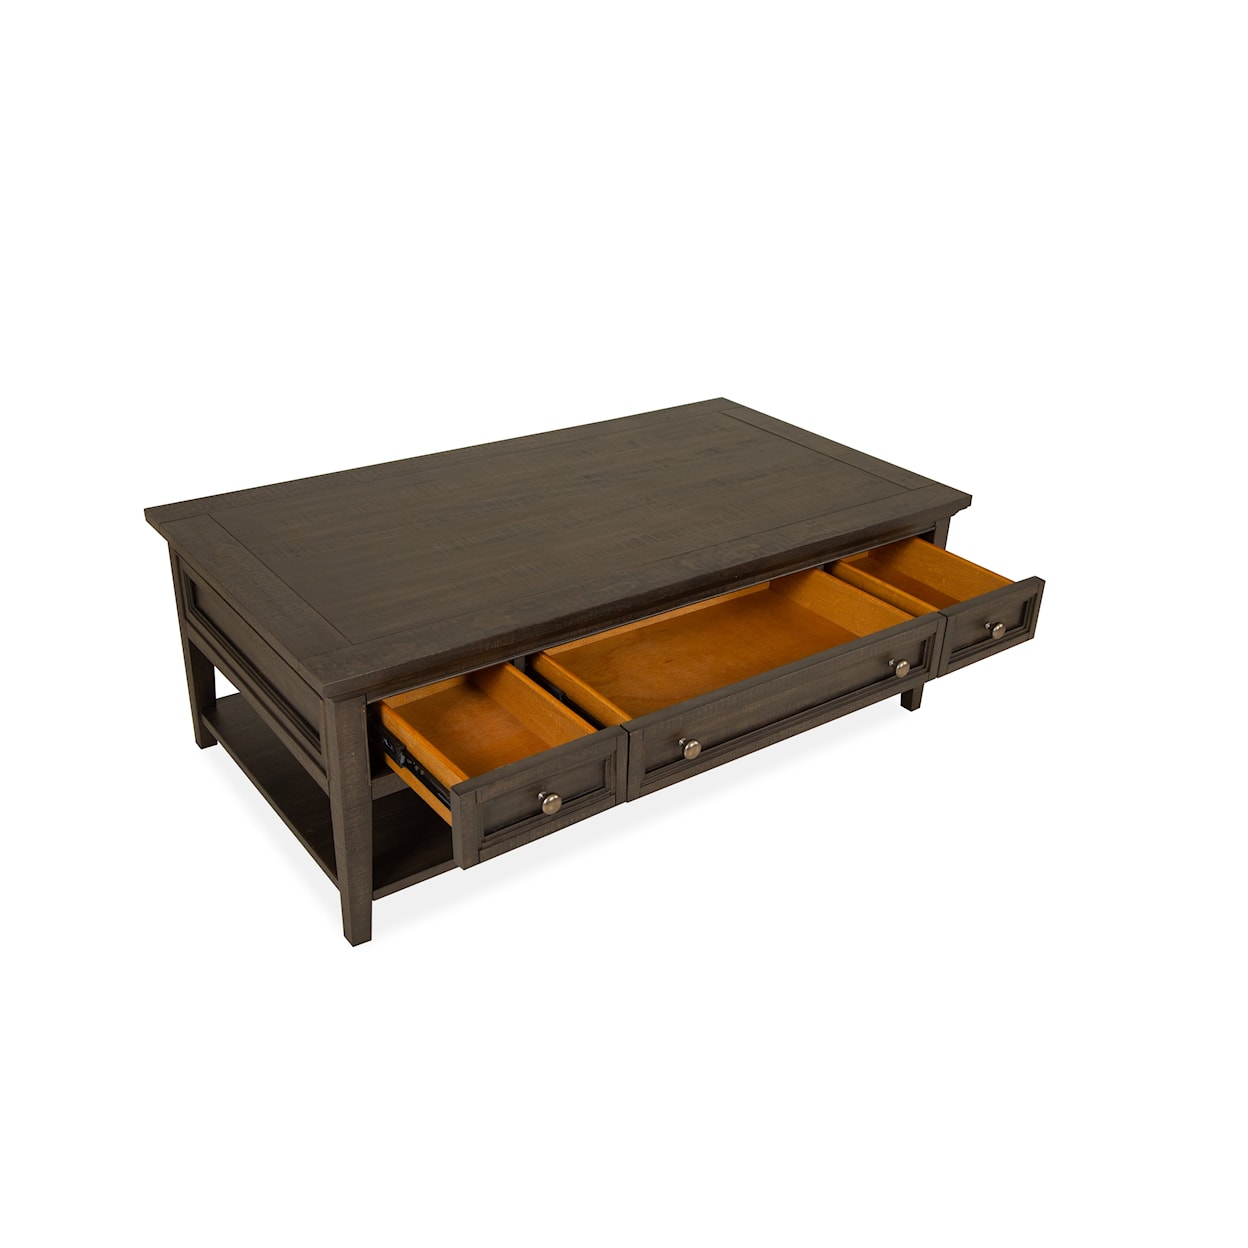 Magnussen Home Westley Falls Occasional Tables Rectangular Cocktail Table